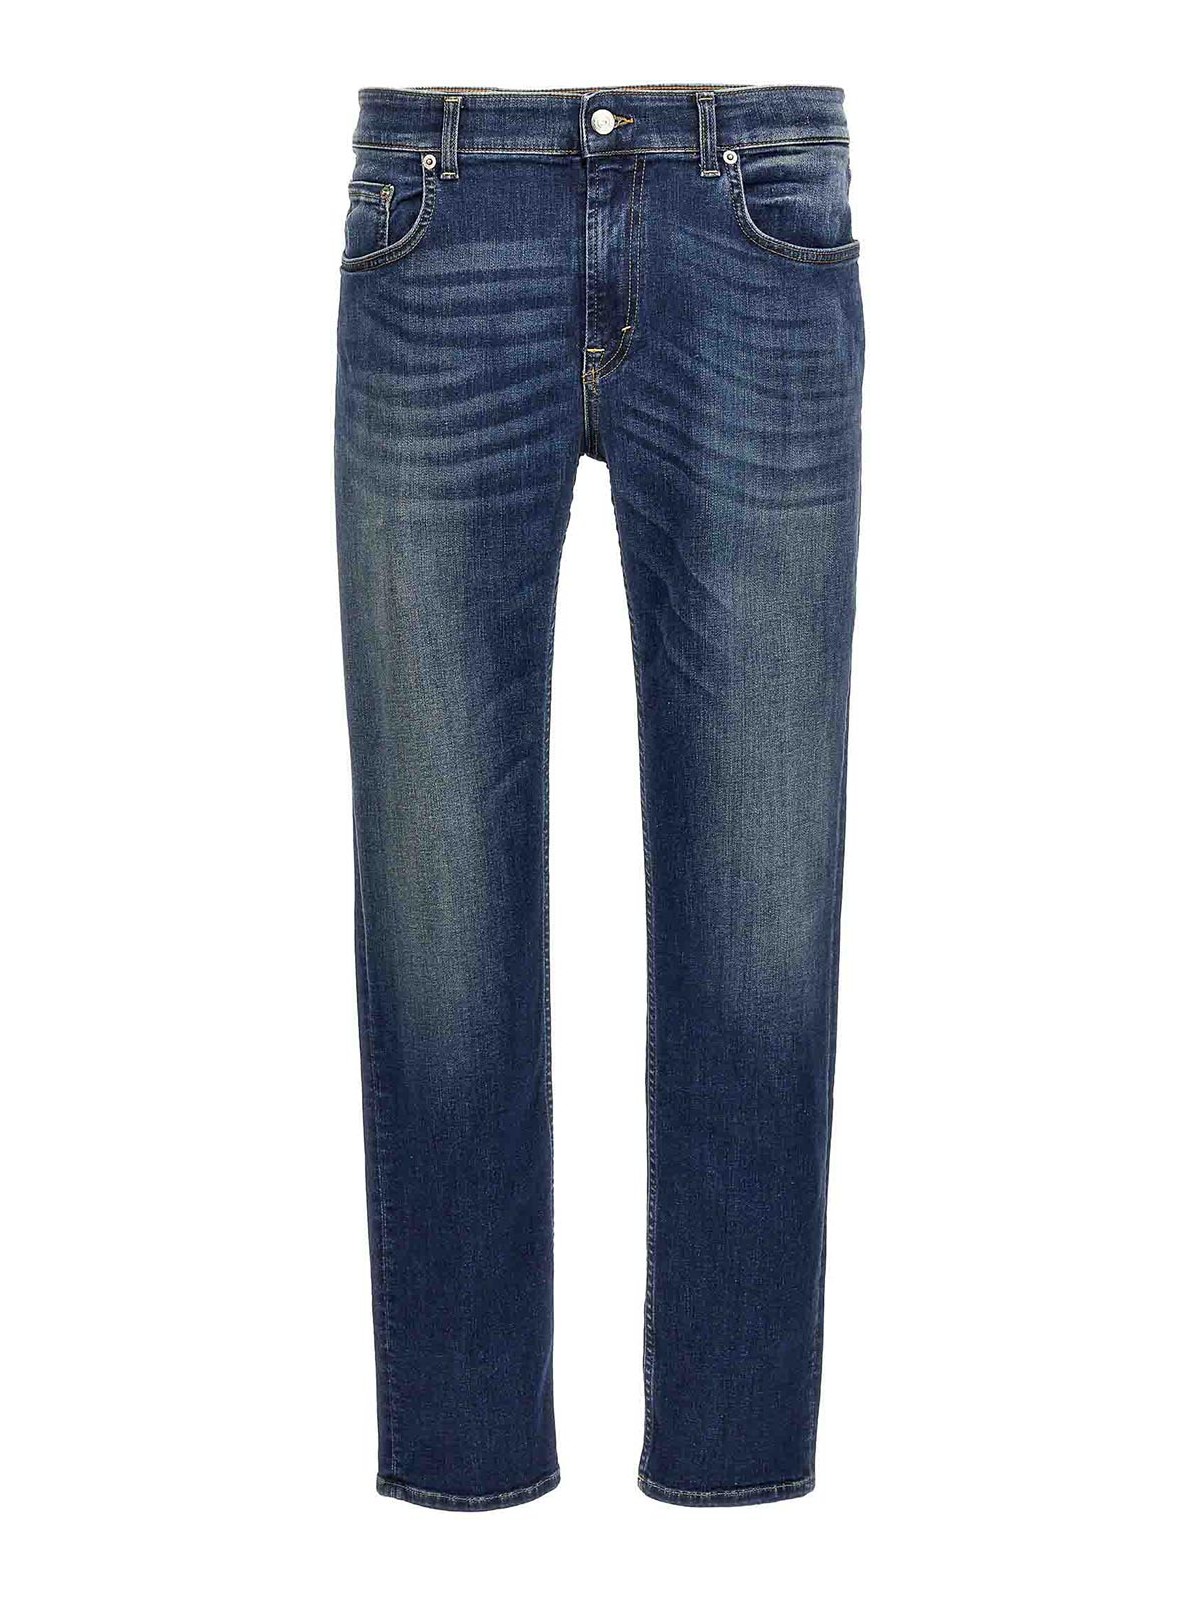 Department 5 Skeith Jeans In Blue